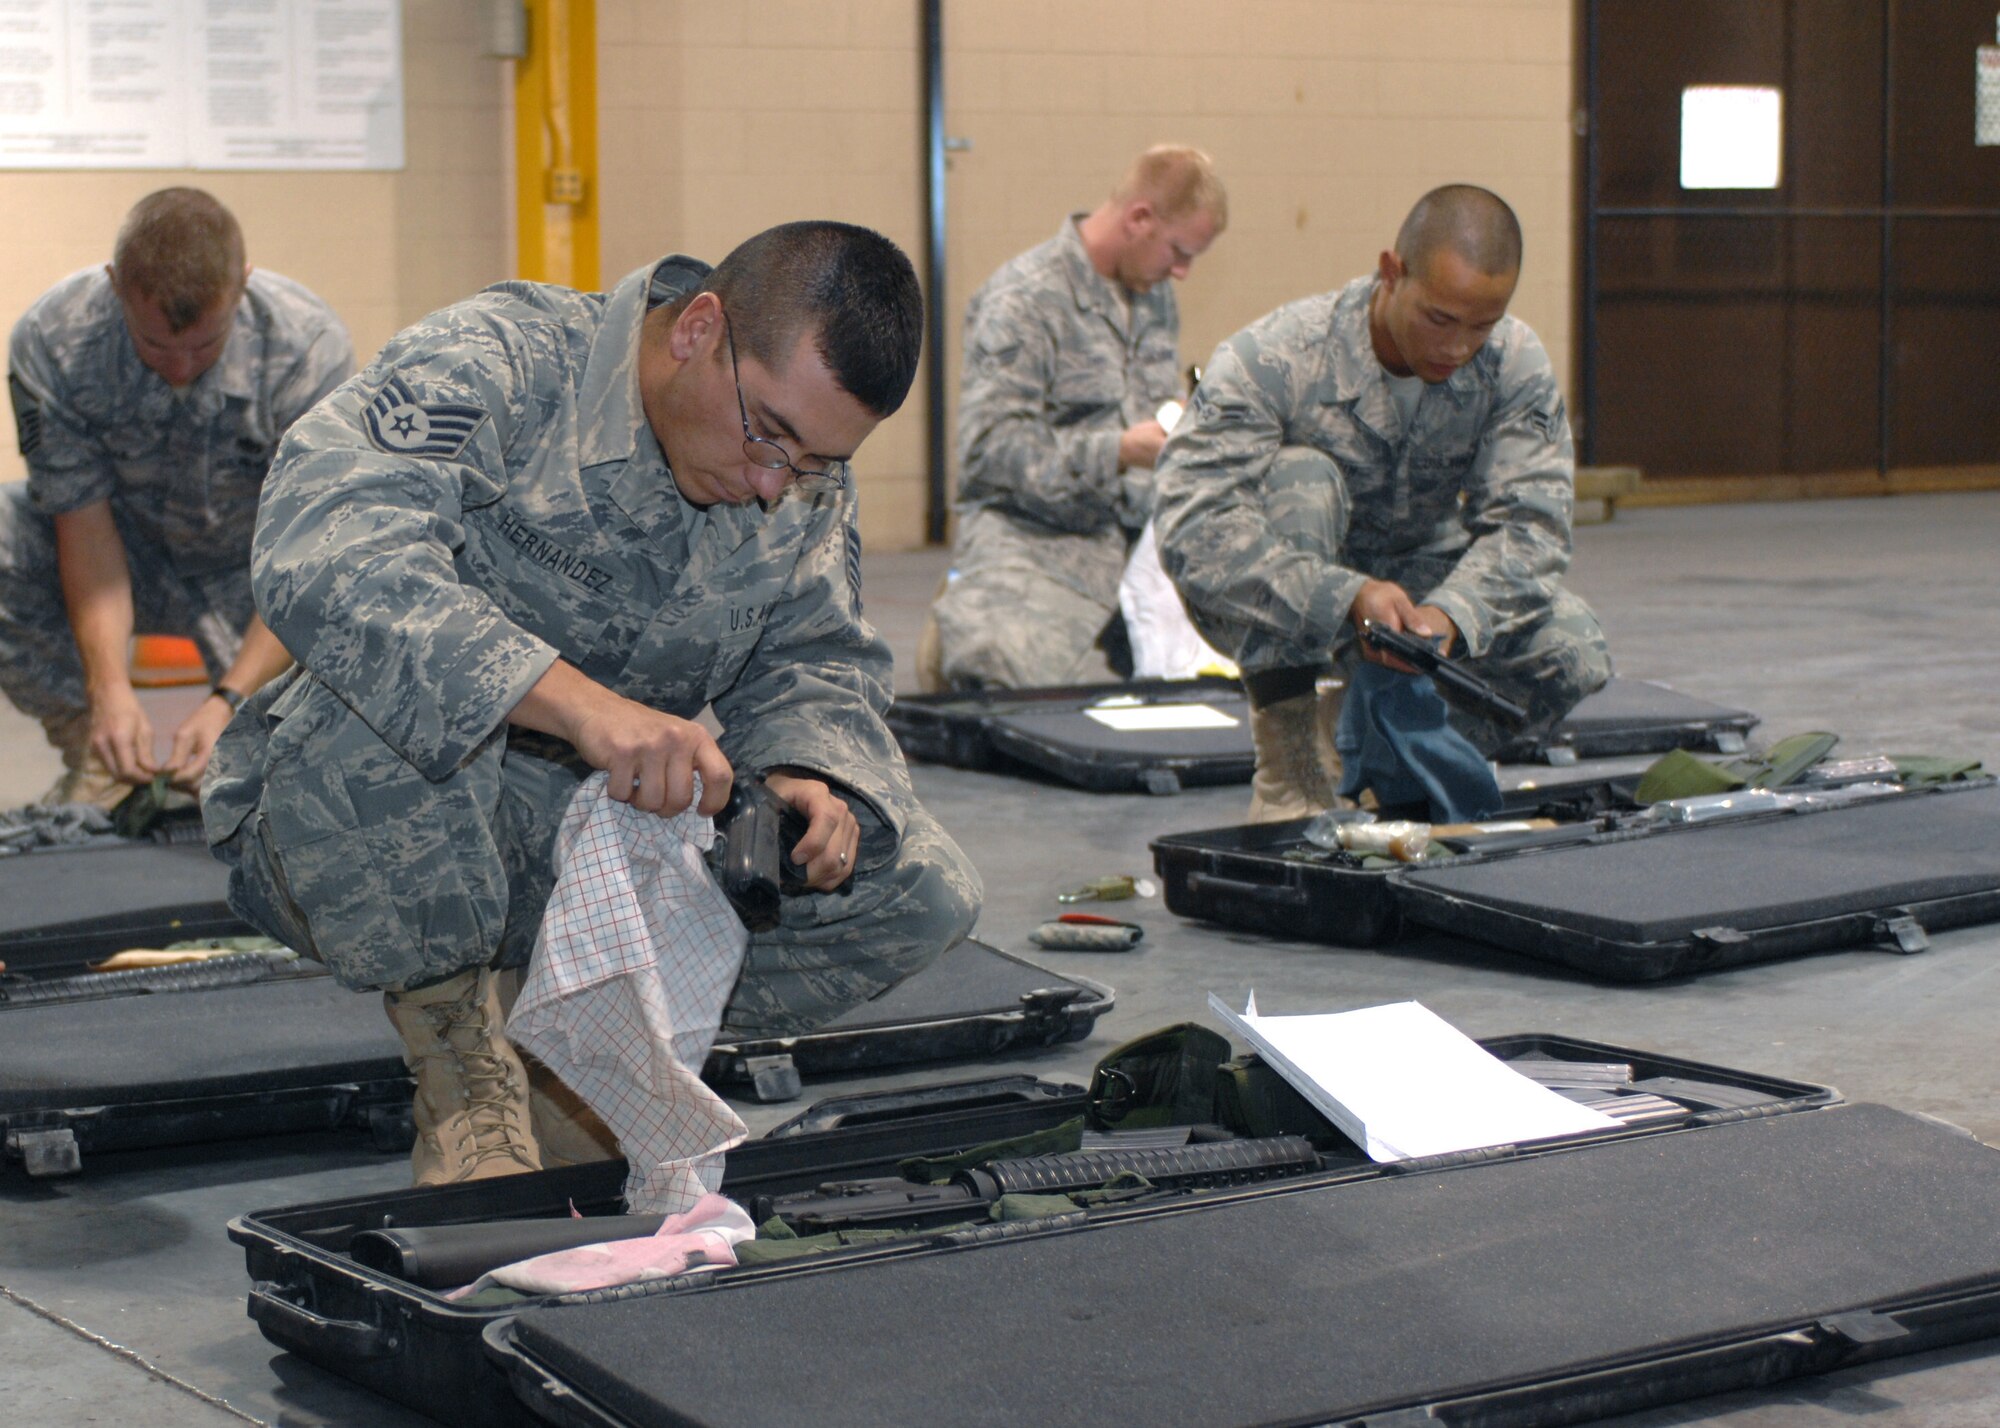 Members of the 49th Materiel Maintenance Group, clean their 9mm pistols before clearing them at the weapons vault, October 8. The J2 deployment team recently returned home to Holloman Air Force Base, N.M. after a 64 day deployment to Bahgram, Kandahar and Jalalabad. (U.S. Air Force photo/Airman 1st Class Veronica Salgado)